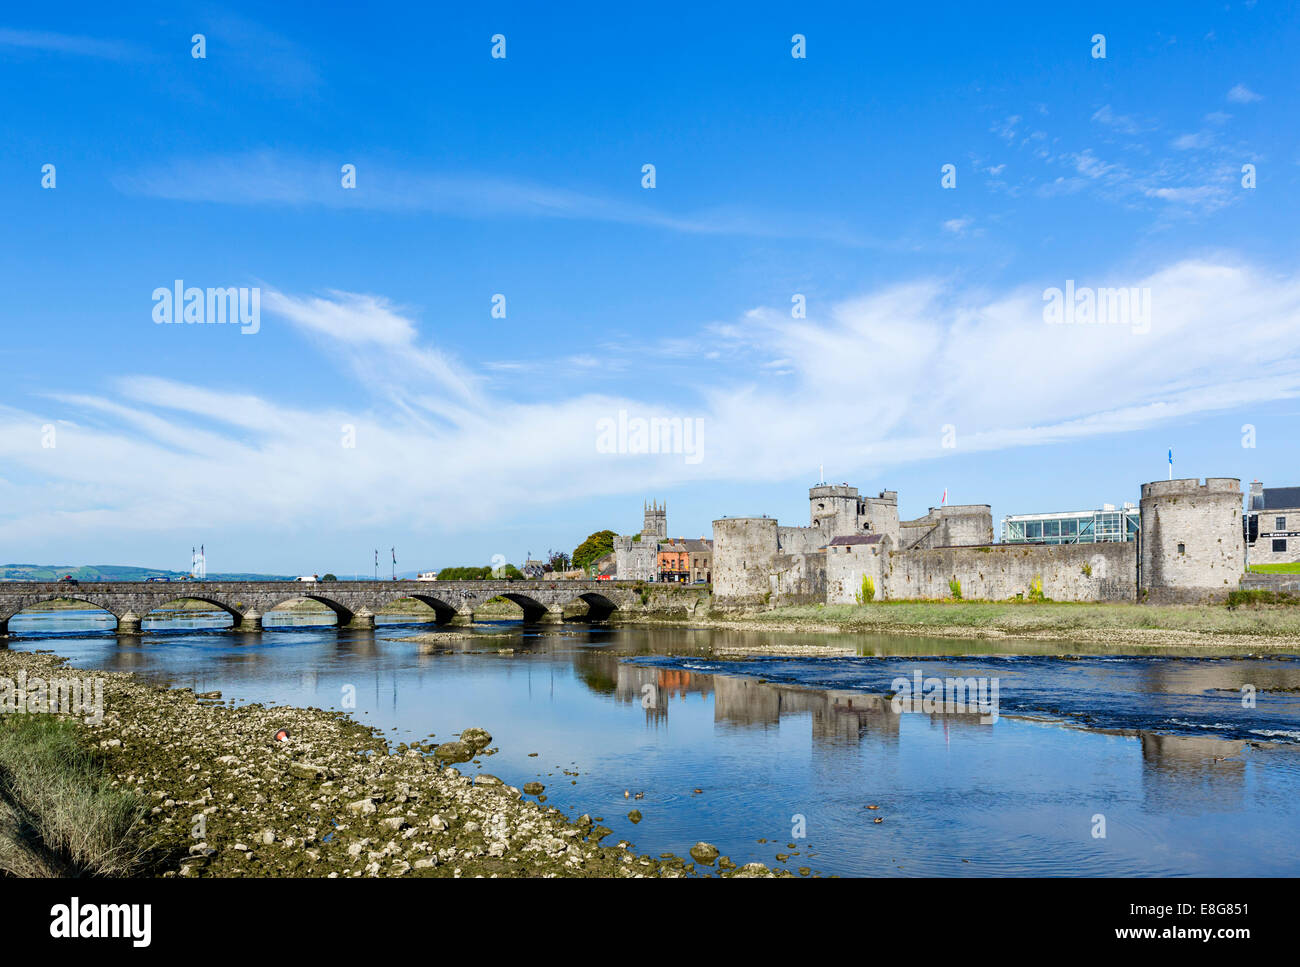 King John's Castle, Thomond Bridge and River Shannon from Clancy's Strand, Limerick City, County Limerick, Republic of Ireland Stock Photo